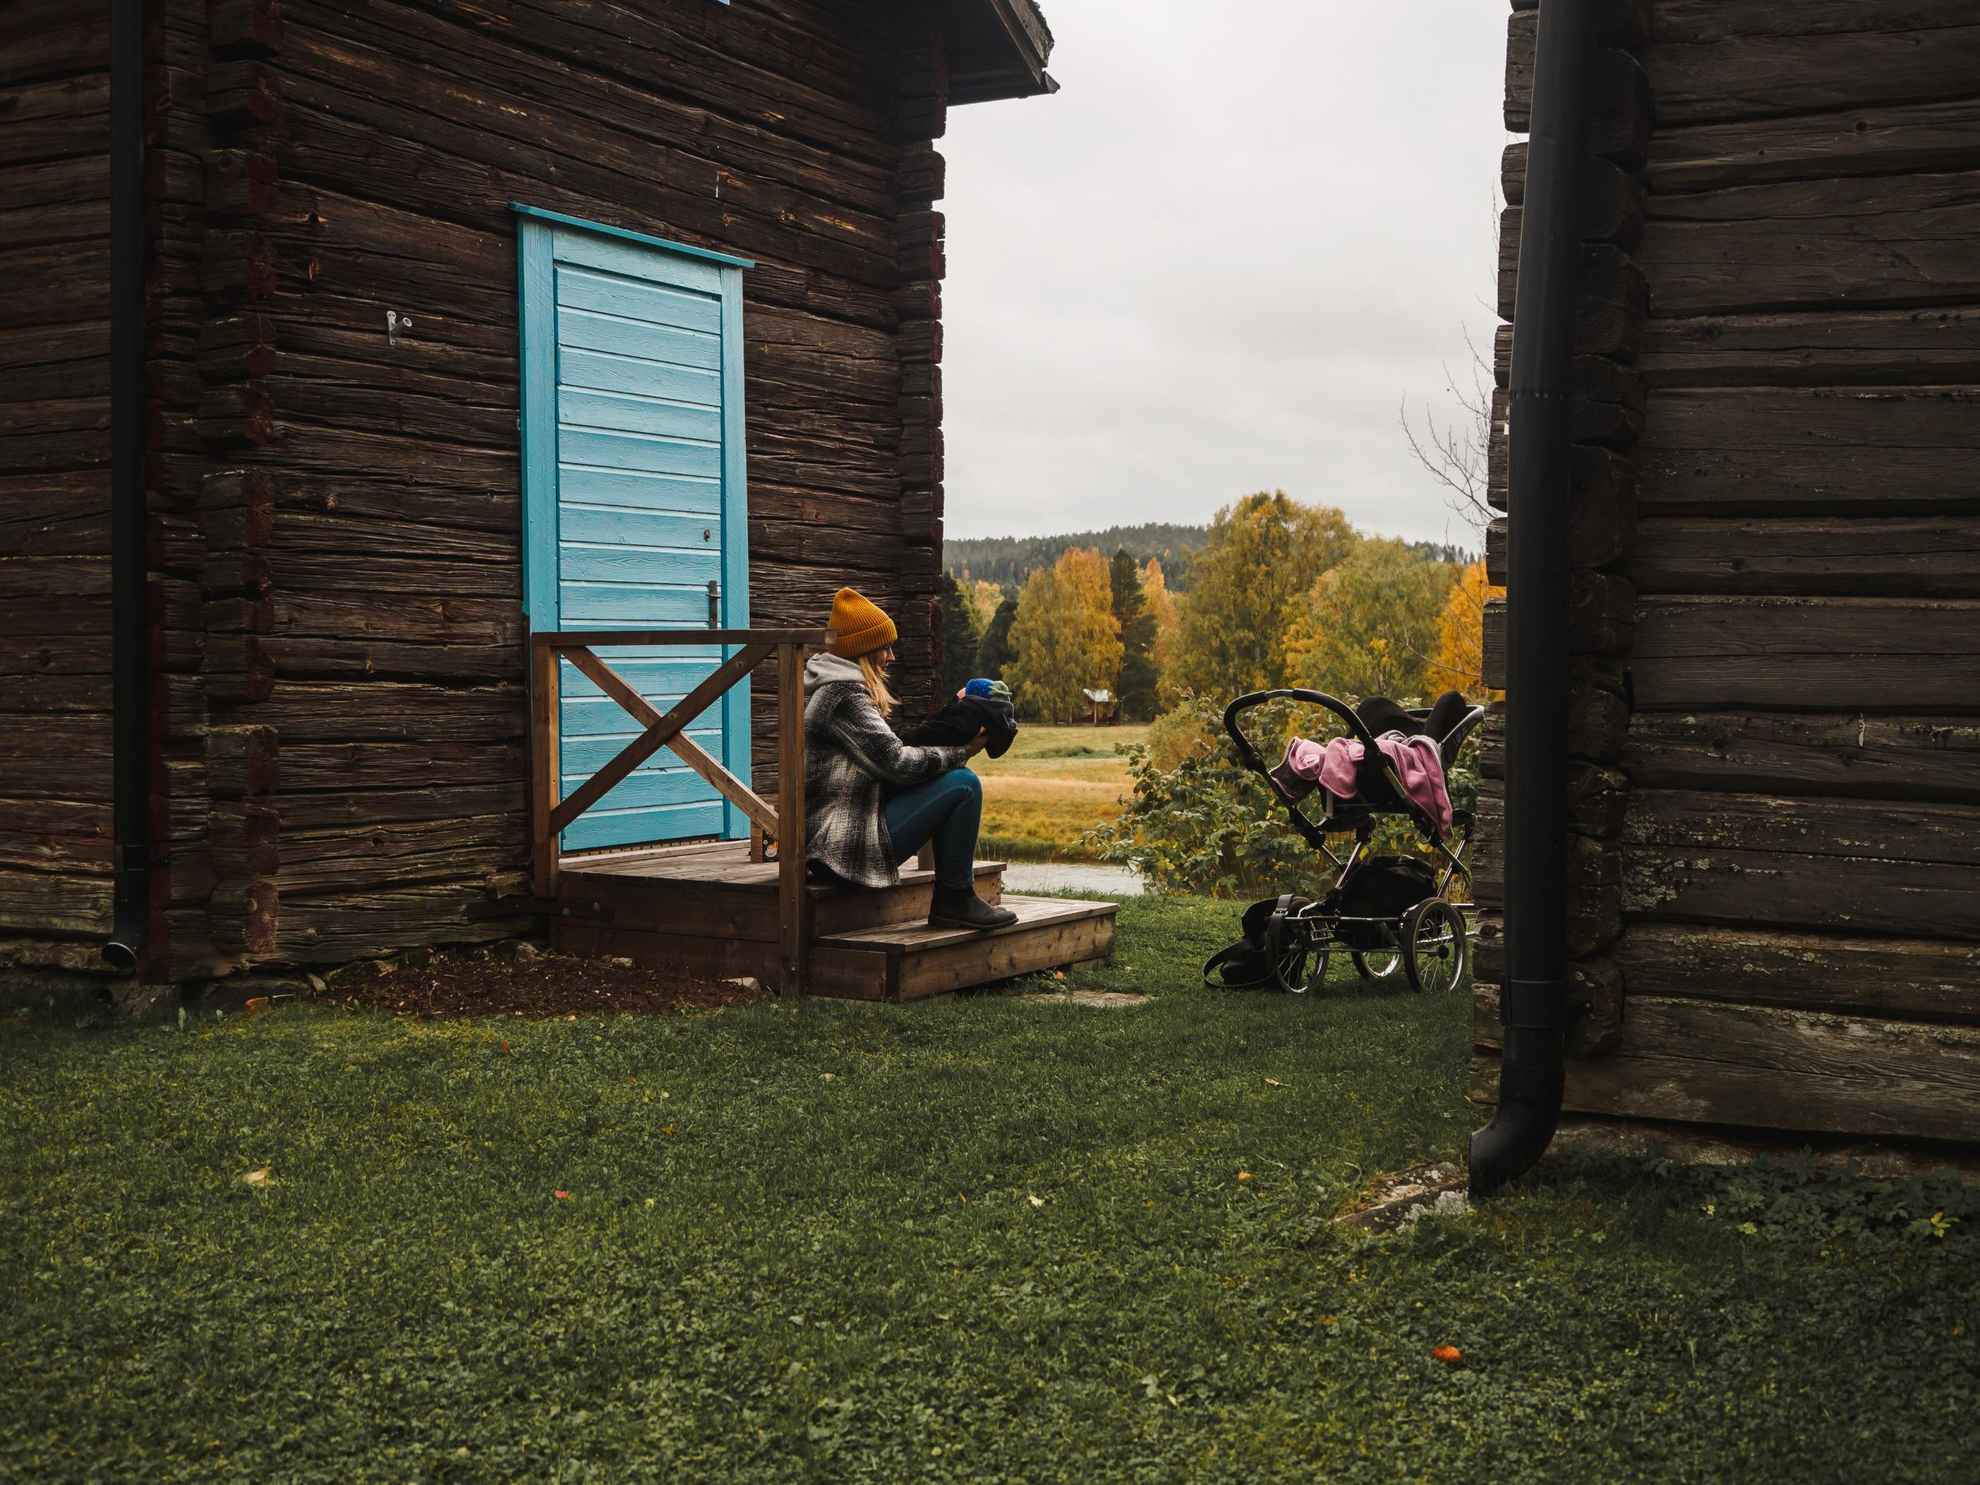 A woman sitting on a wooden porch with a baby. The stroller stands next to them.